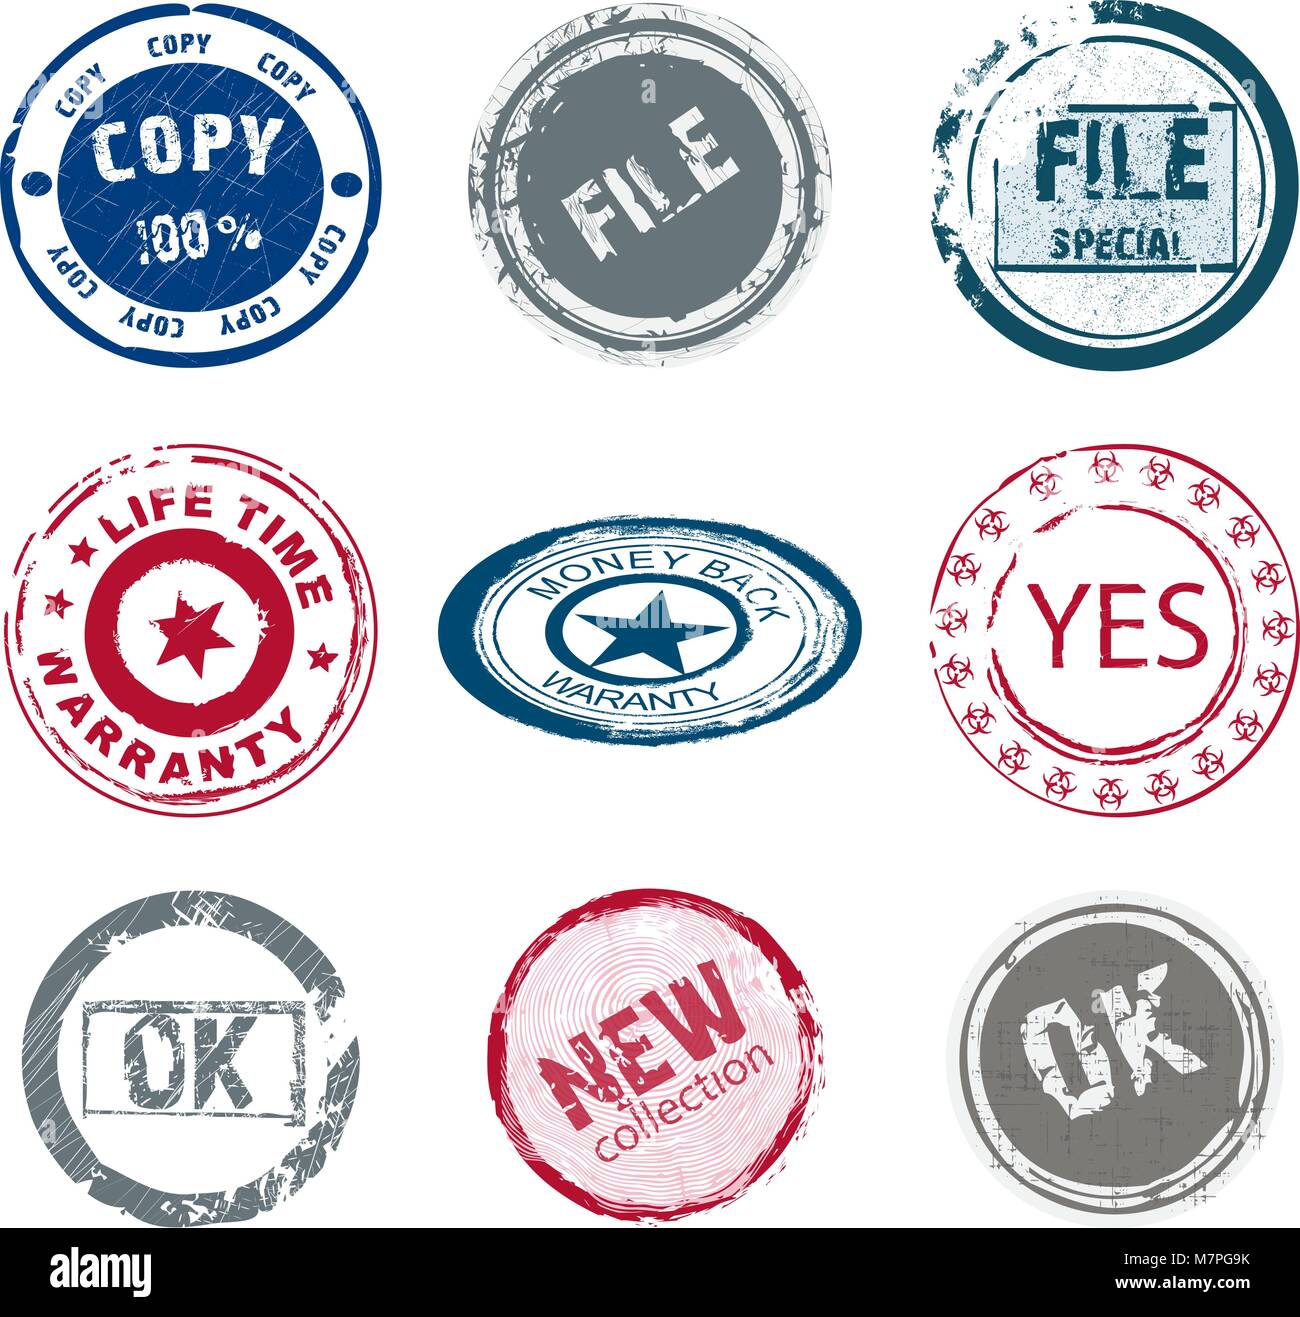 Vintage round stamps color. Use the effect of old, worn, rubber stamp Stock Vector